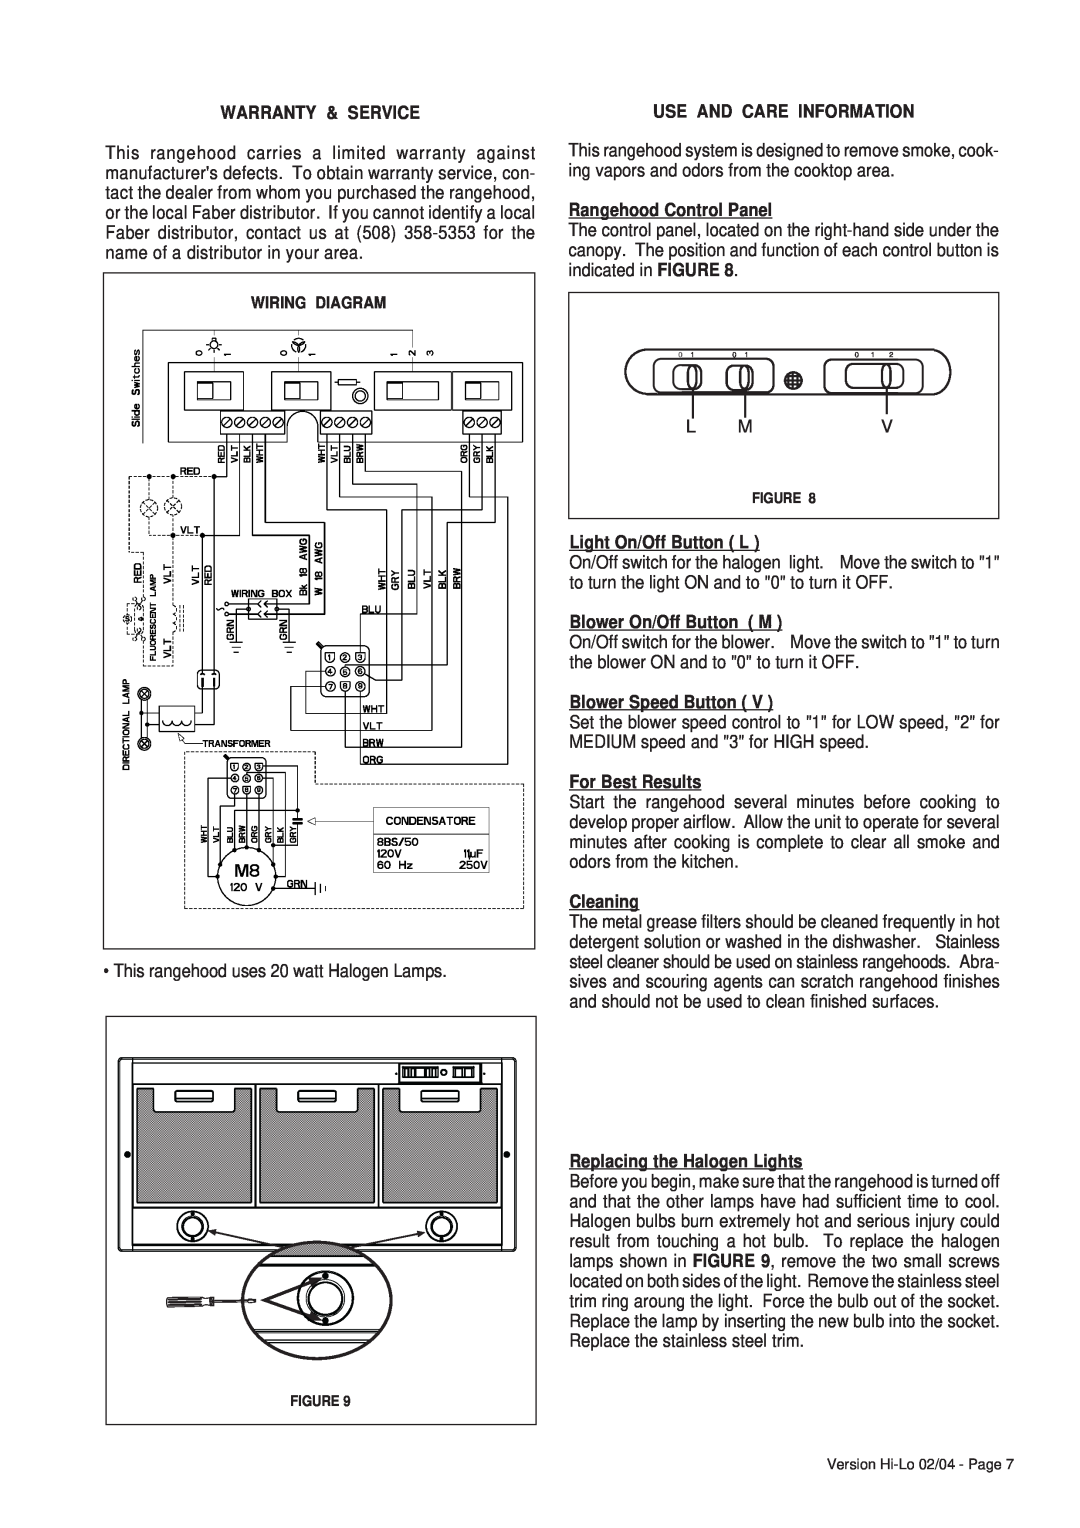 Faber 6048624 Warranty & Service, Use And Care Information, Rangehood Control Panel, Light On/Off Button L, Cleaning 